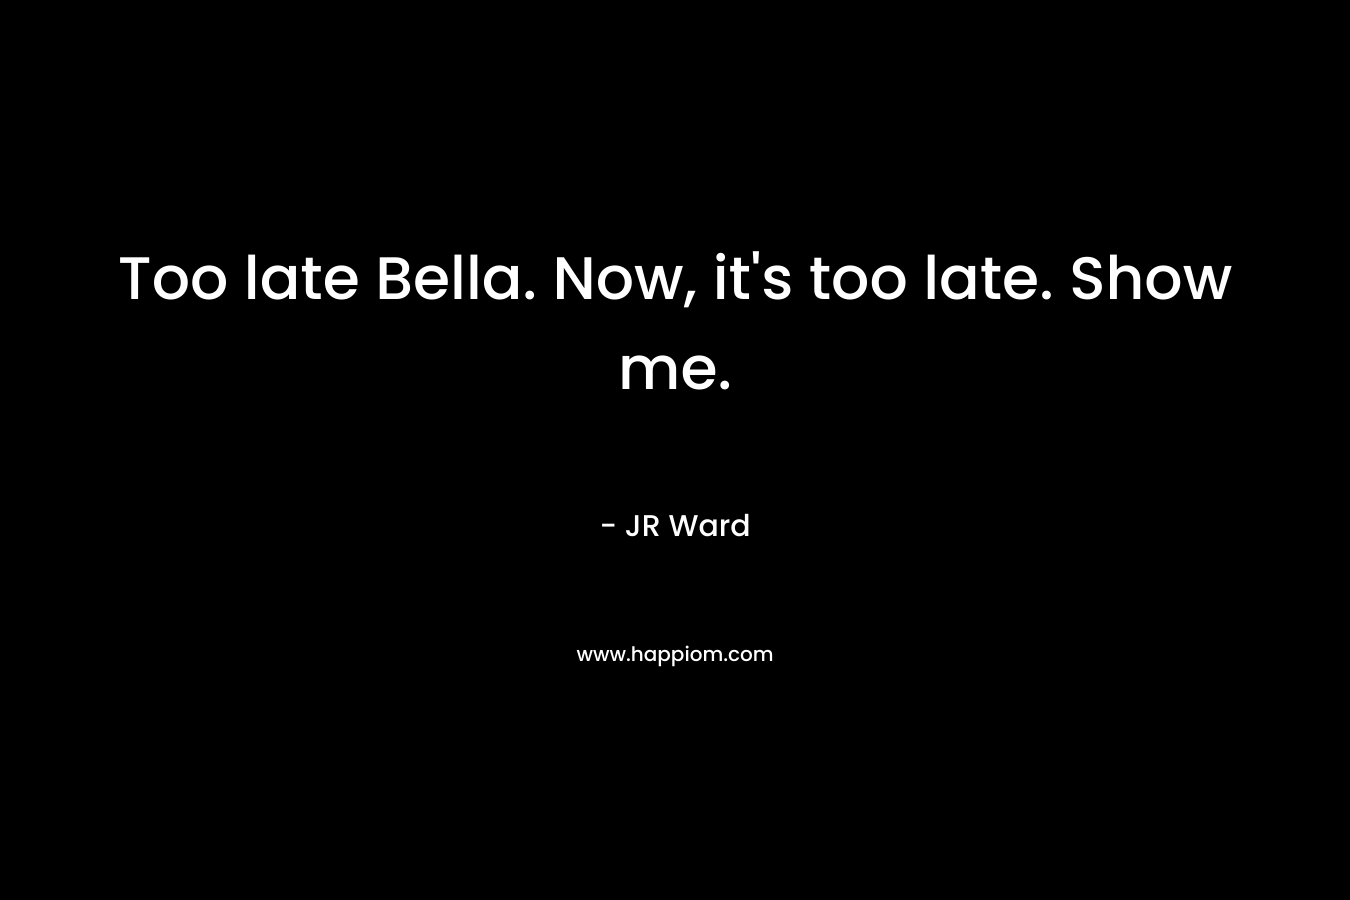 Too late Bella. Now, it's too late. Show me.